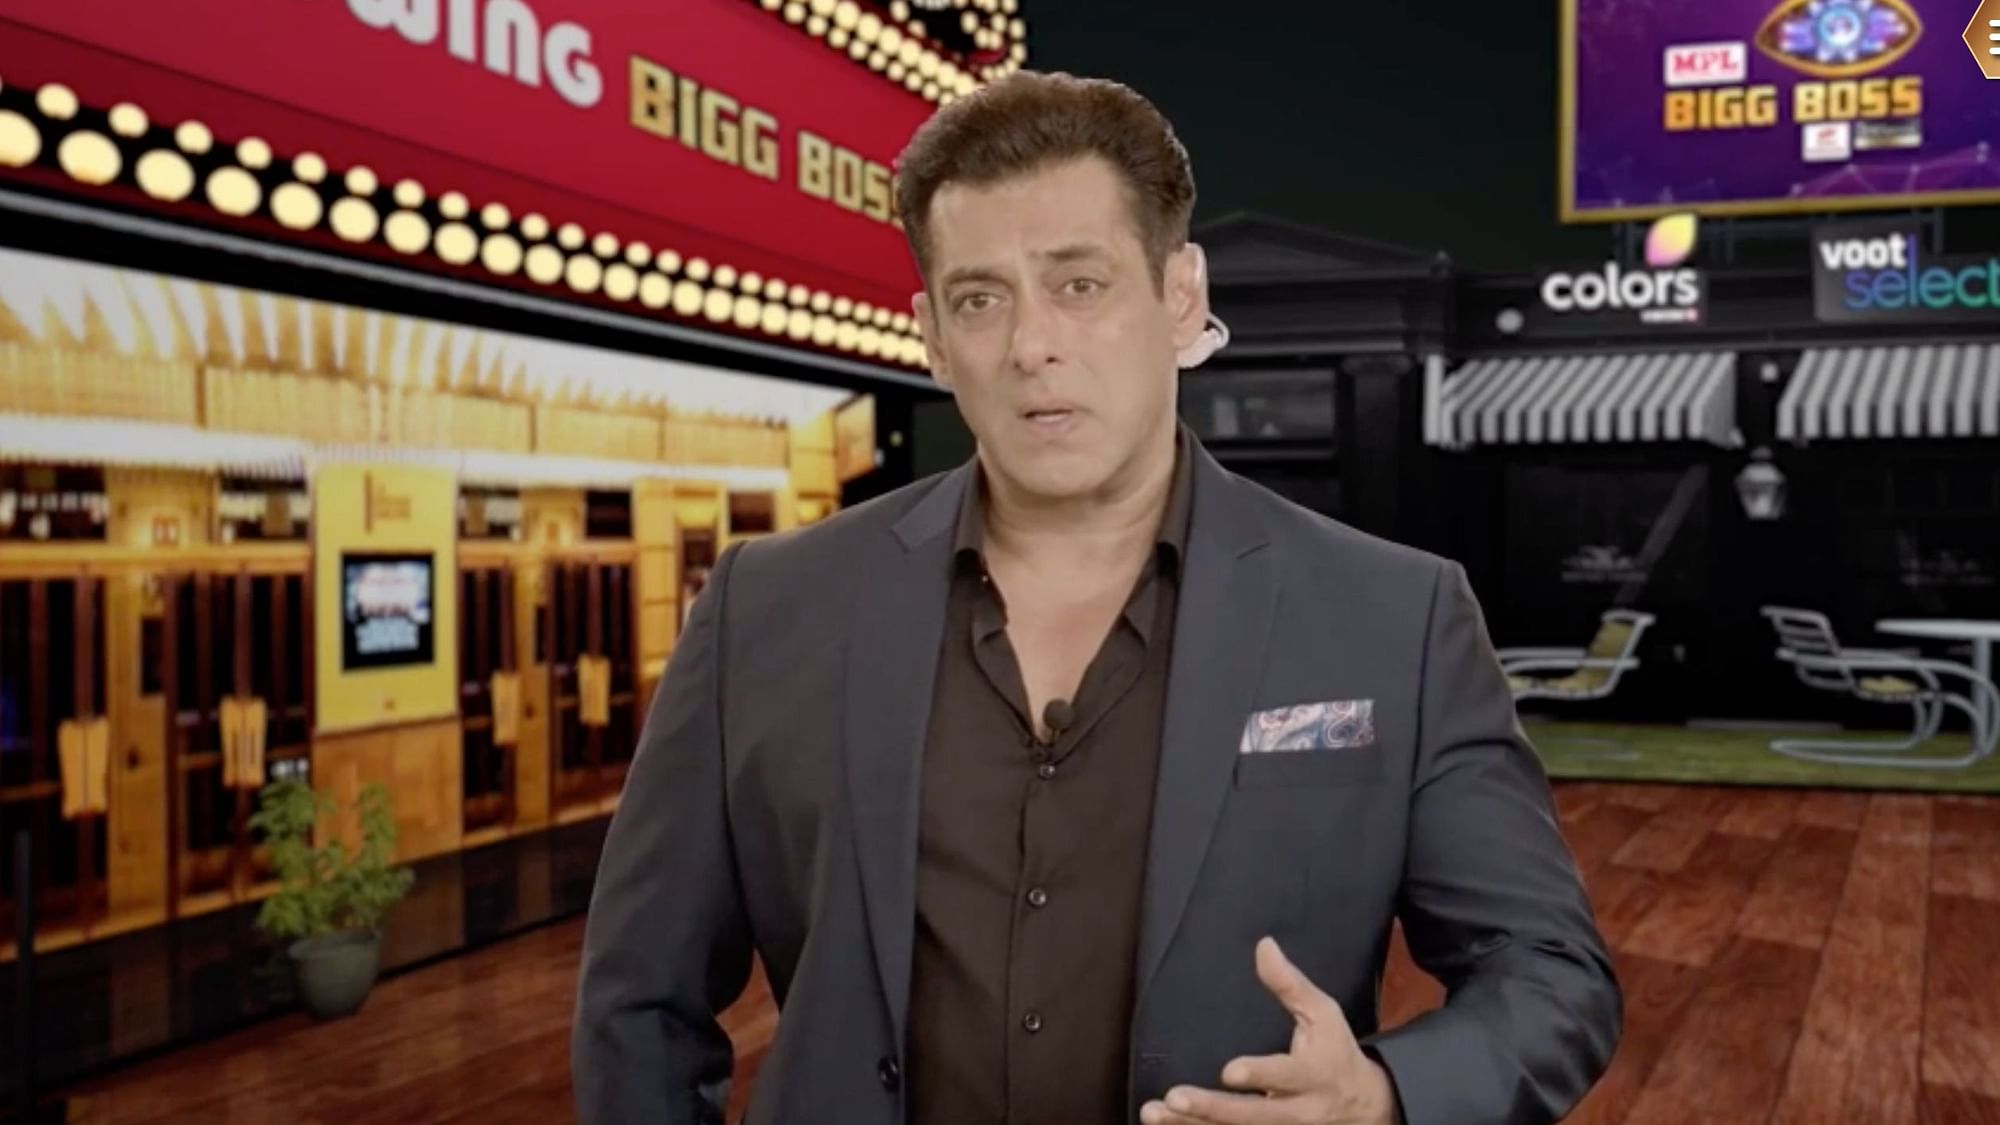 Salman Khan takes the stage to explain the safety protocols for Bigg Boss 14.